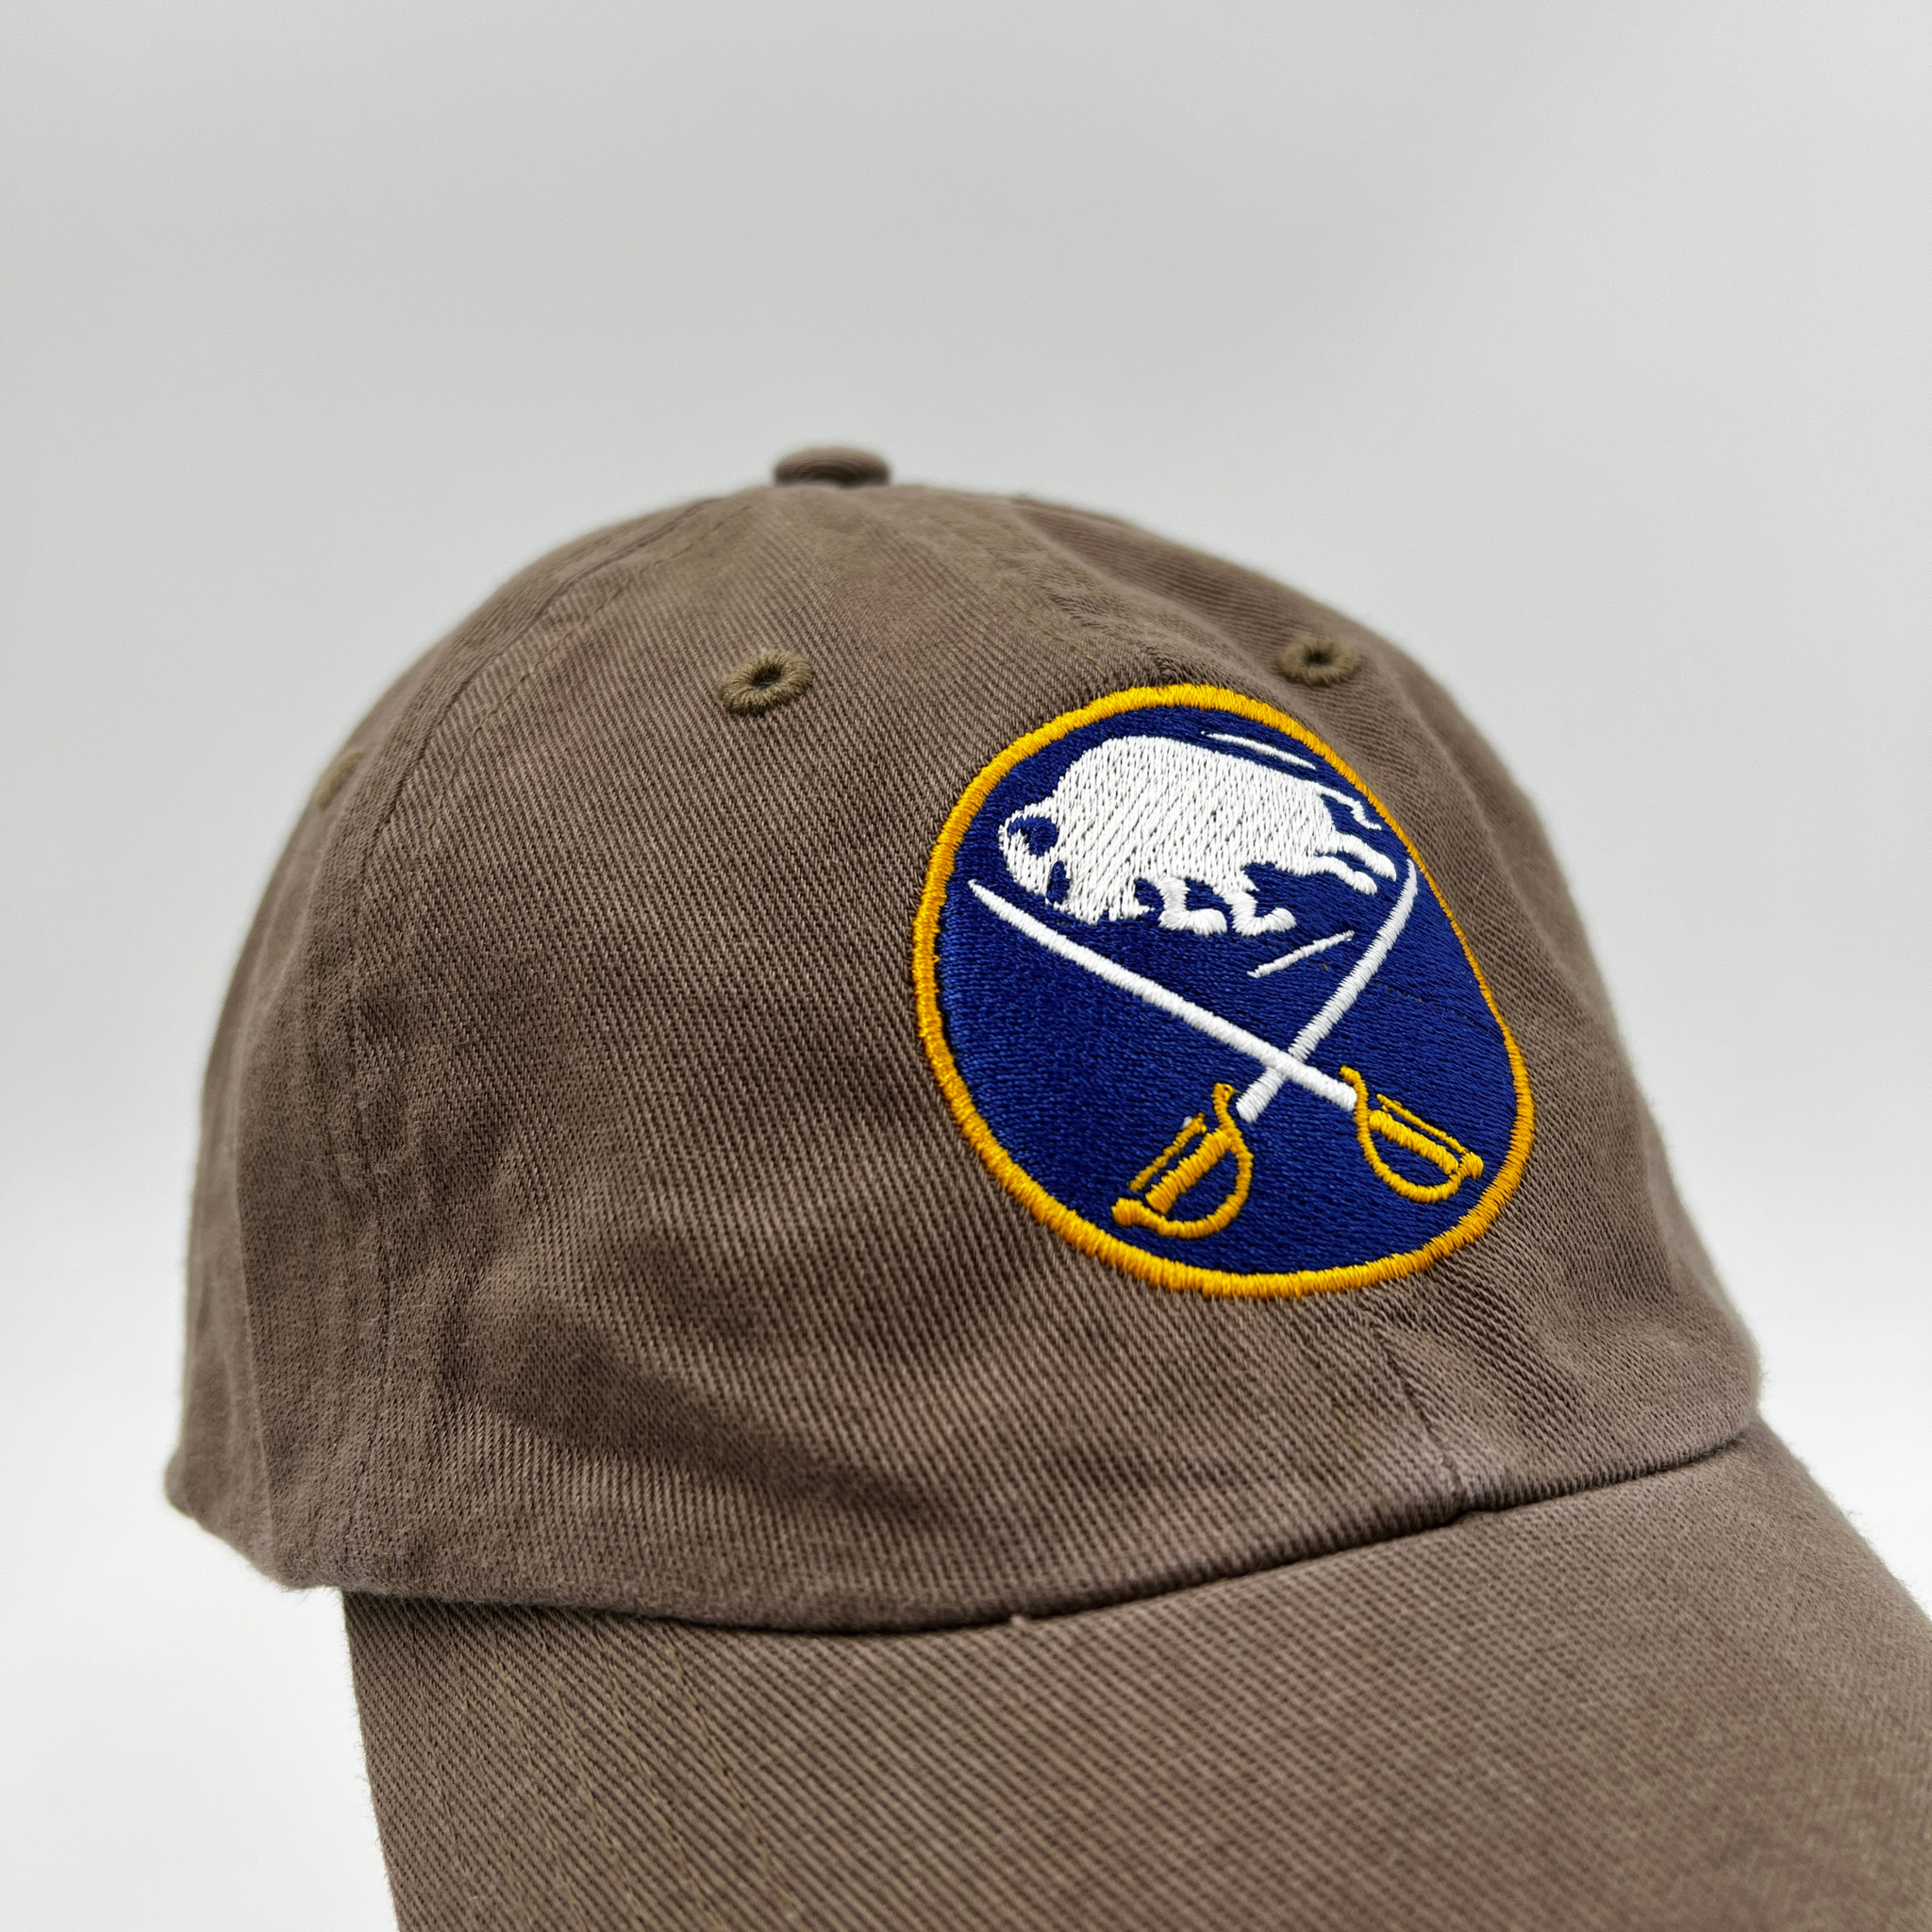  '47 NHL Vintage Clean Up Adjustable Hat, Adult One Size Fits  All (Buffalo Sabres Blue) : Sports & Outdoors